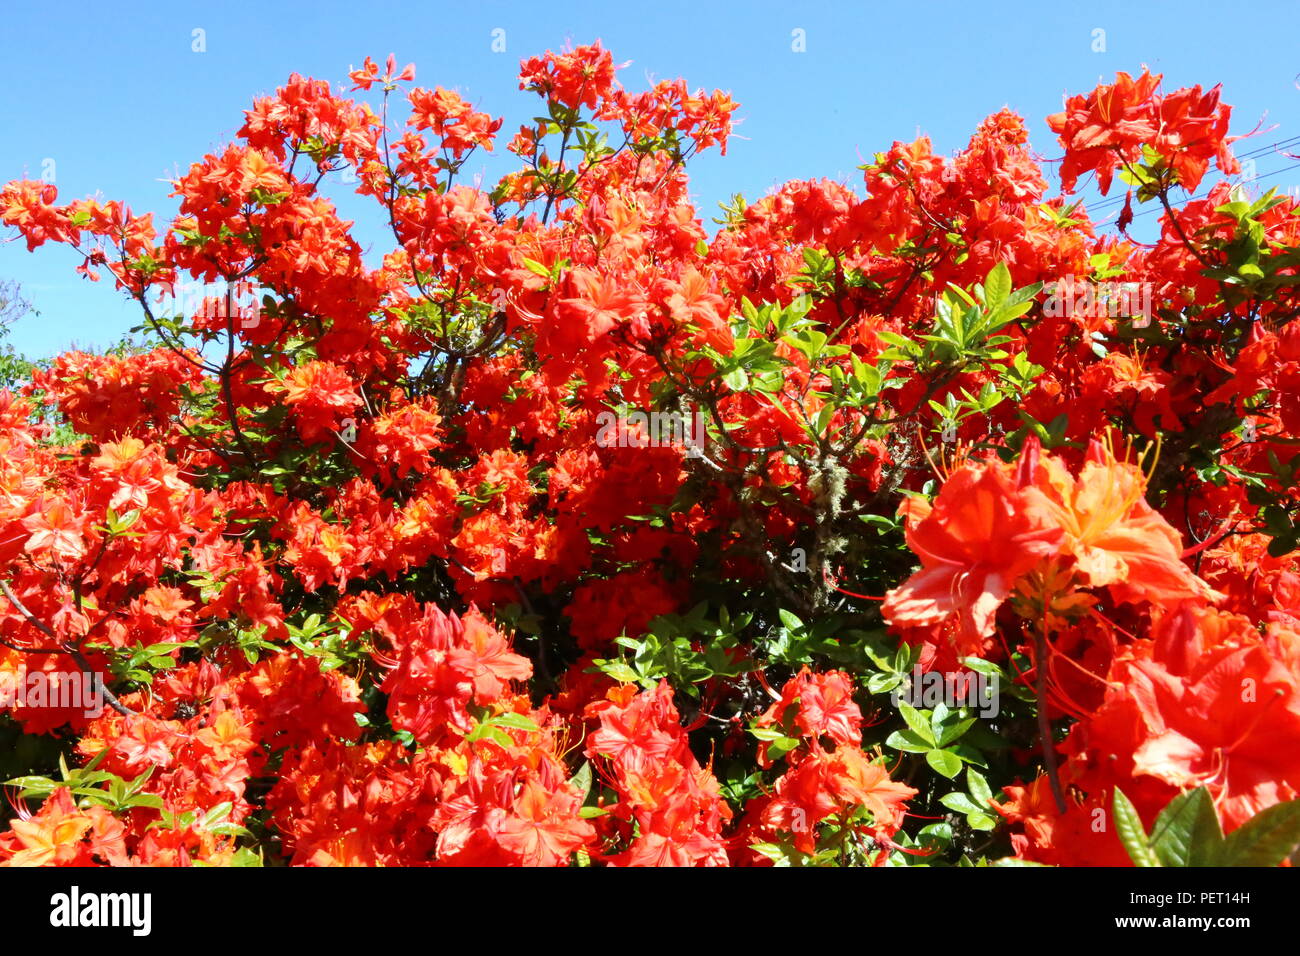 Orange flowers with green leaves against blue sky Stock Photo